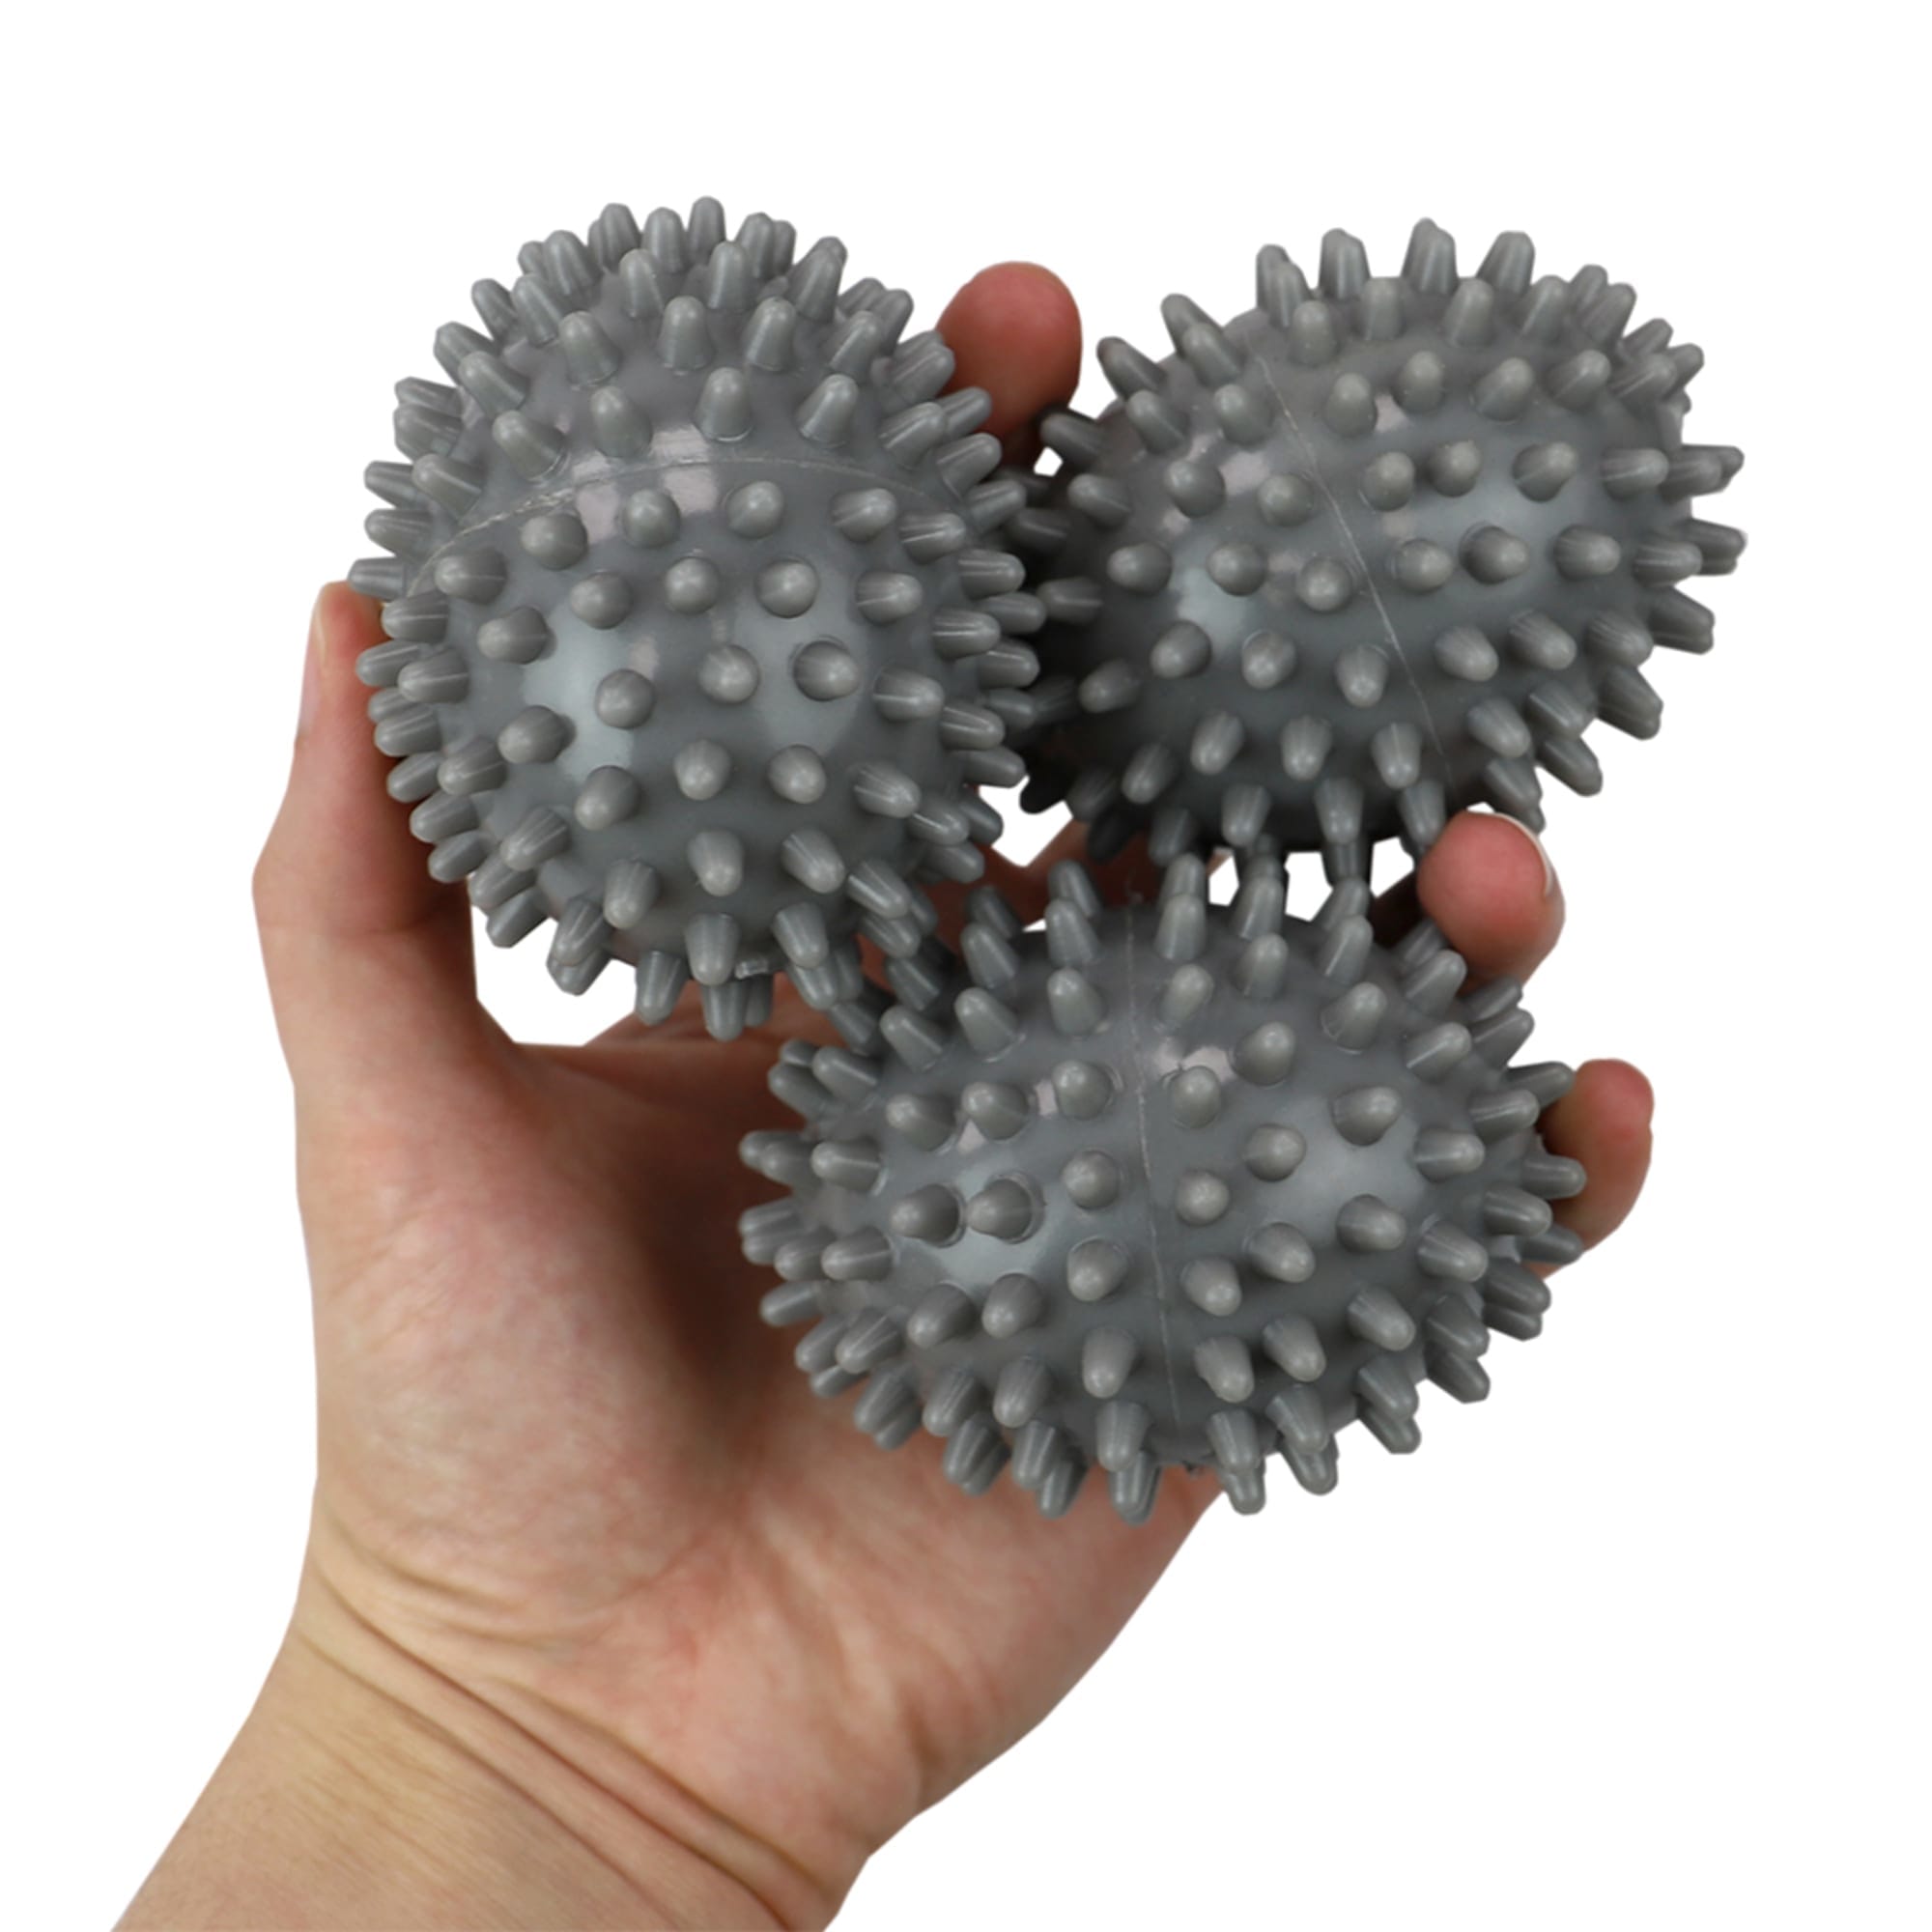 Home Basics Spiked Plastic Dryer Balls, Grey $3.00 EACH, CASE PACK OF 24